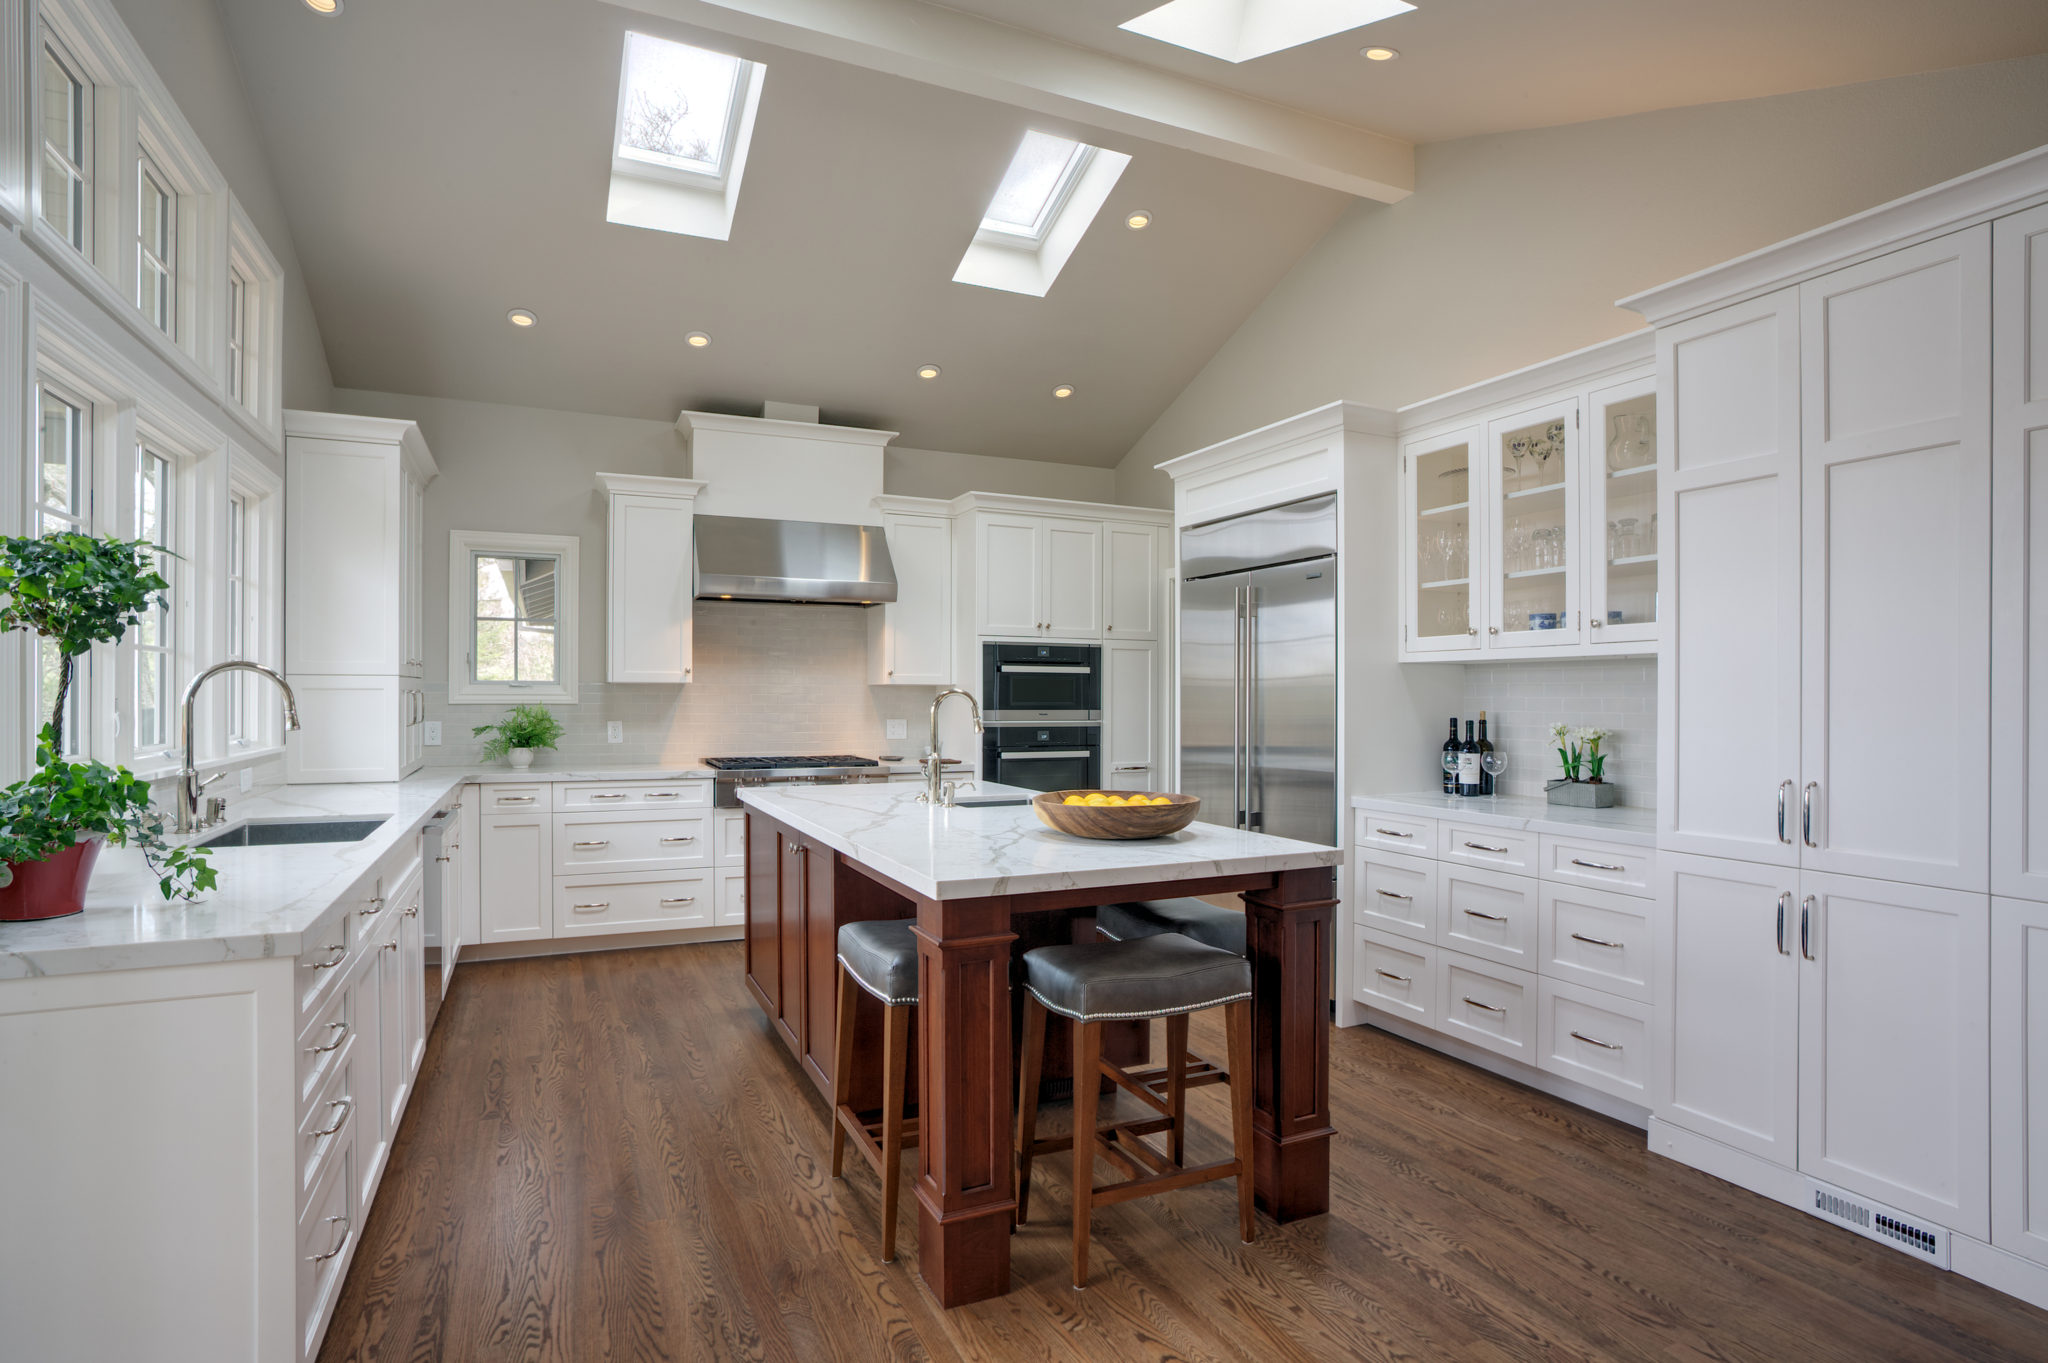 lighting fixture for vaulted ceiling idea kitchen